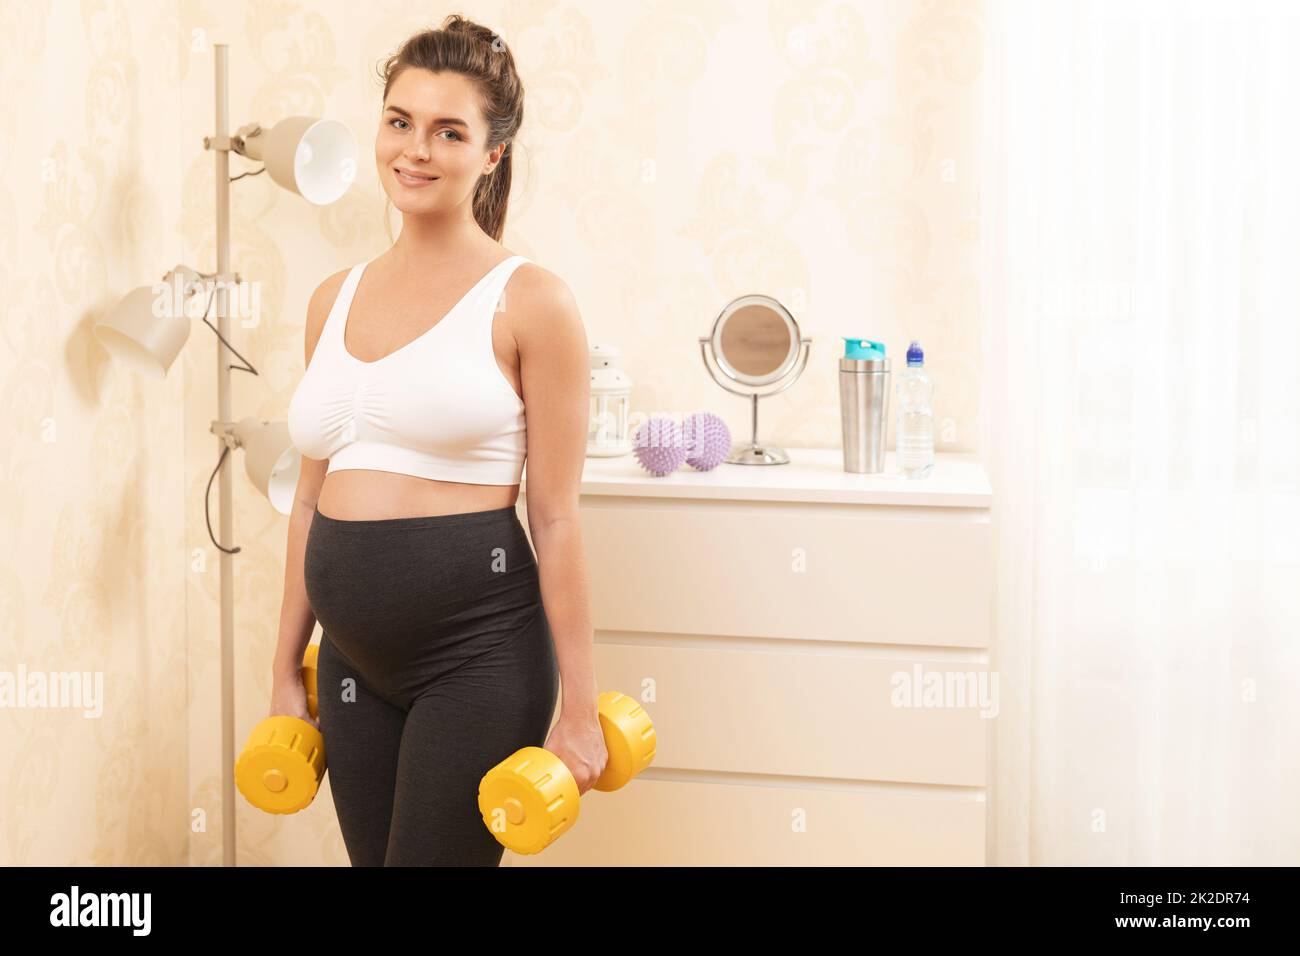 Pregnant woman during her fitness workout with yellow dumbbells at home Stock Photo